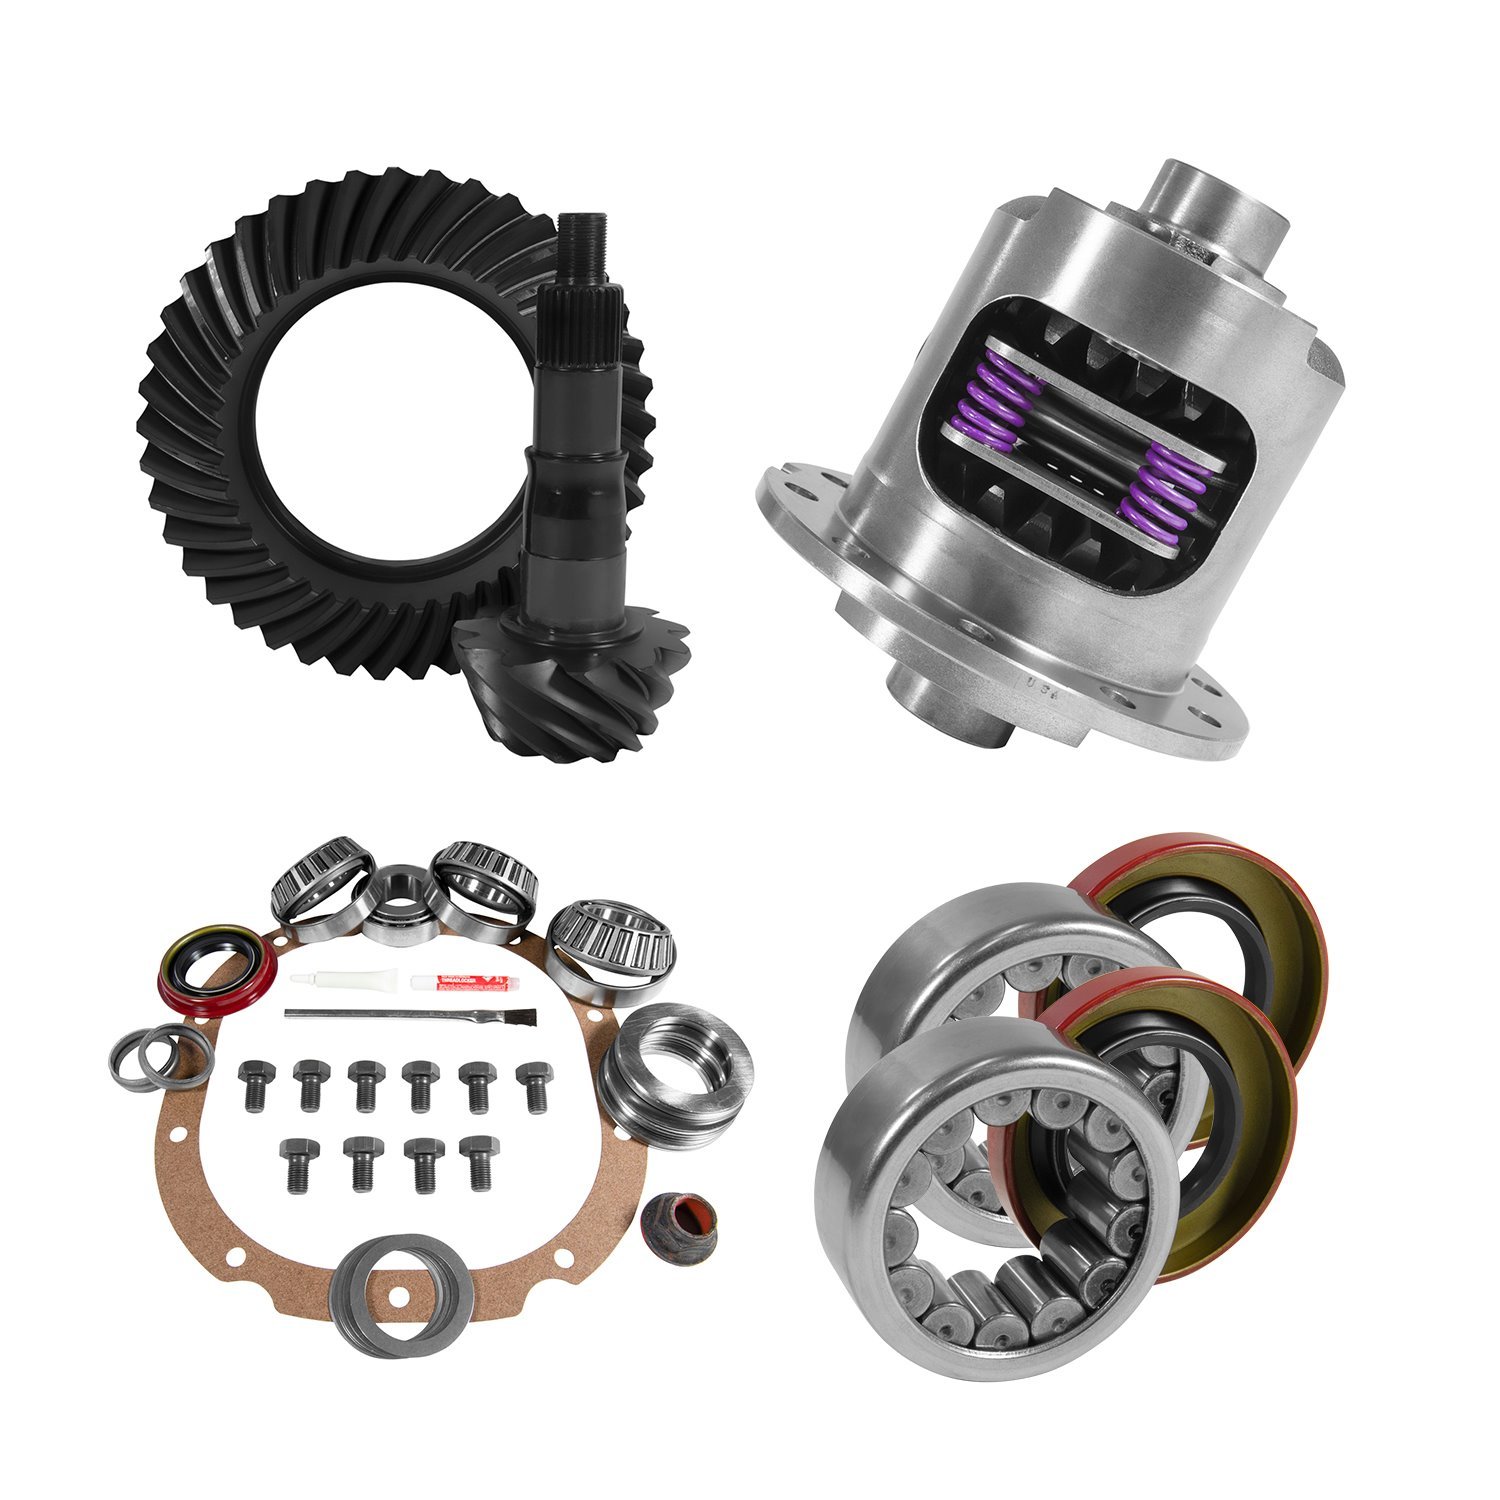 8.8 in. Ford 4.11 Rear Ring & Pinion, Install Kit, 31Spl Posi, 2.99 in. Axle Bearings